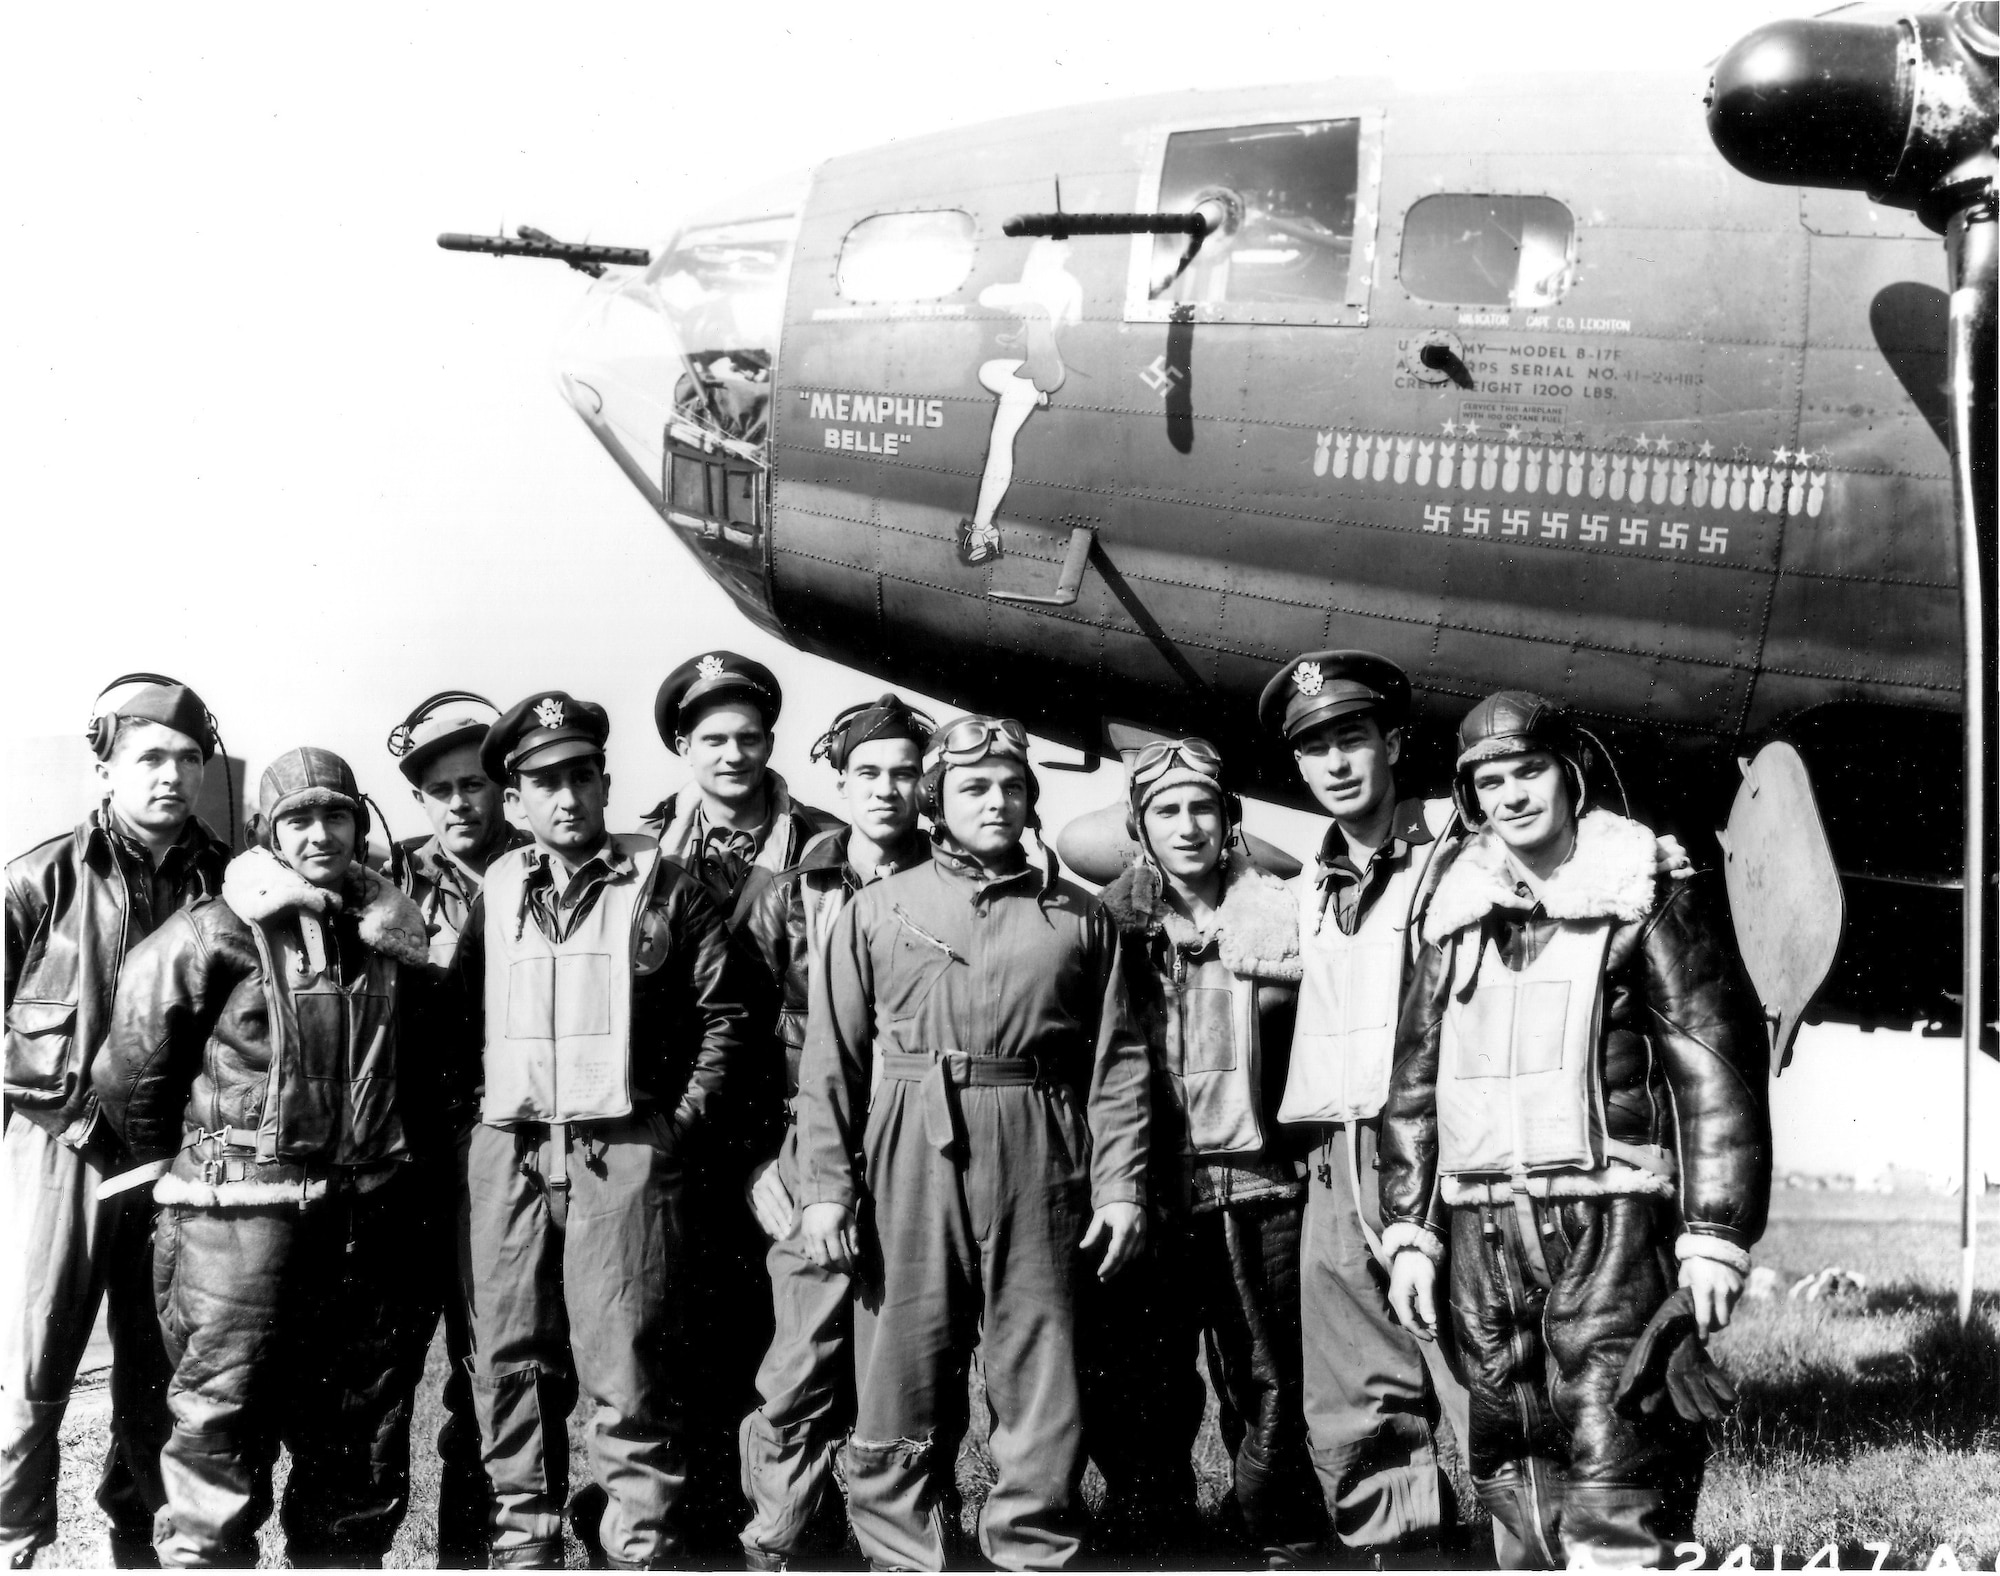 1940's -- The crew of the B-17 Flying Fortress "Memphis Belle" is shown at an air base in England after completing 25 missions over enemy territory on June 7, 1943.  They are, left to right: Tech. Sgt. Harold P. Loch of Green Bay, Wis., top turret gunner; Staff Sgt. Cecil H. Scott of Altoona, Penn., ball turret gunner; Tech. Sgt. Robert J, Hanson of Walla Walla, Wash., radio operator; Capt. James A. Verinis, New Haven, Conn., co-pilot; Capt. Robert K. Morgan of Ashville, N. C., pilot; Capt. Charles B. Leighton of Lansing, Mich., navigator; Staff Sgt. John P. Quinlan of Yonkers, N. Y., tail gunner; Staff Sgt. Casimer A. Nastal of Detroit, Mich., waist gunner; Capt. Vincent B. Evans of Henderson, Texas, bombardier and Staff Sgt. Clarence E. Wichell of Oak Park, Ill., waist gunner.